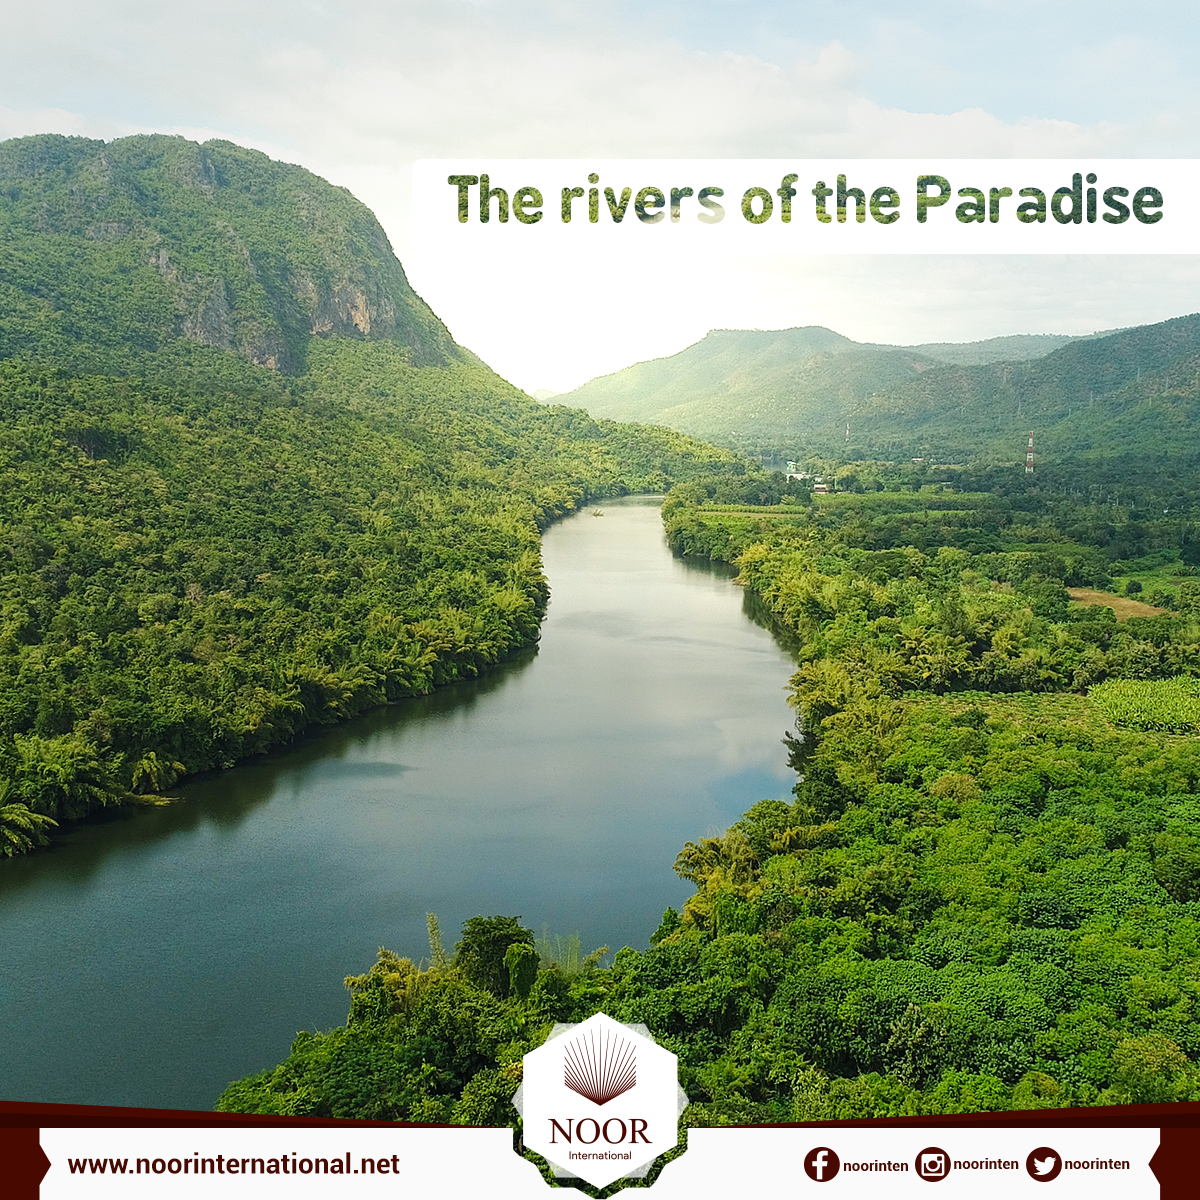 The rivers of the Paradise